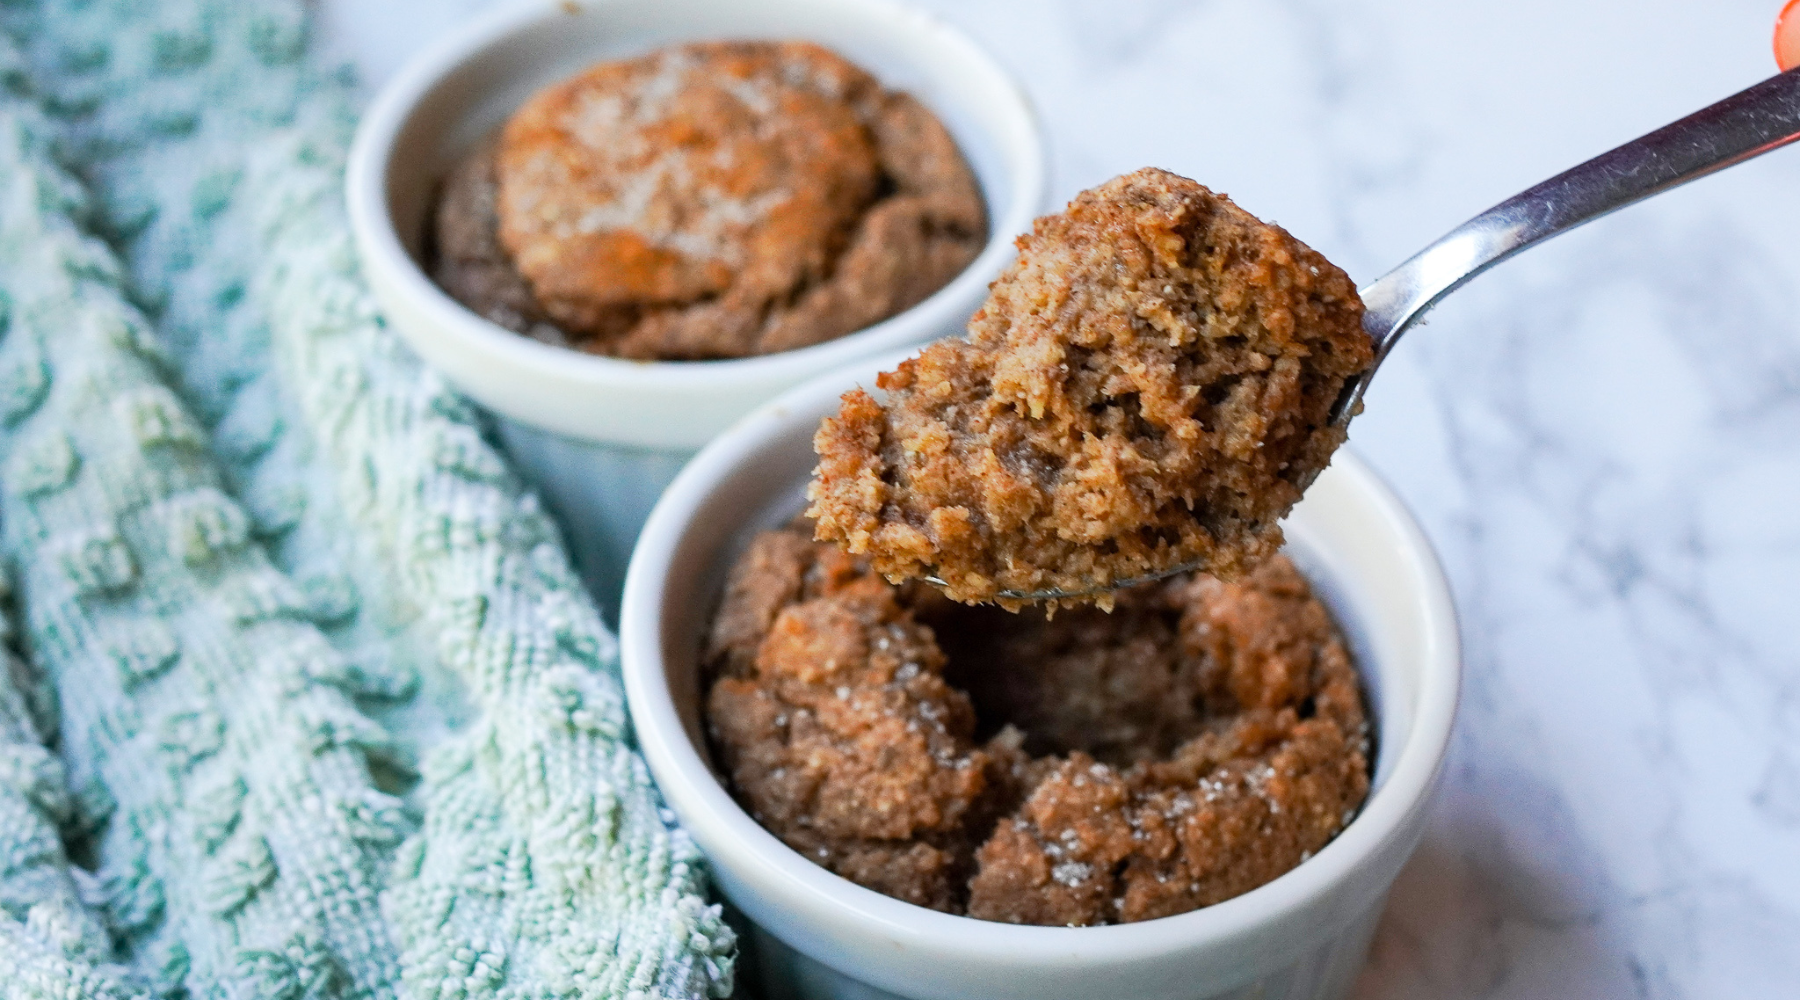 SNICKERDOODLE BAKED OAT CAKES